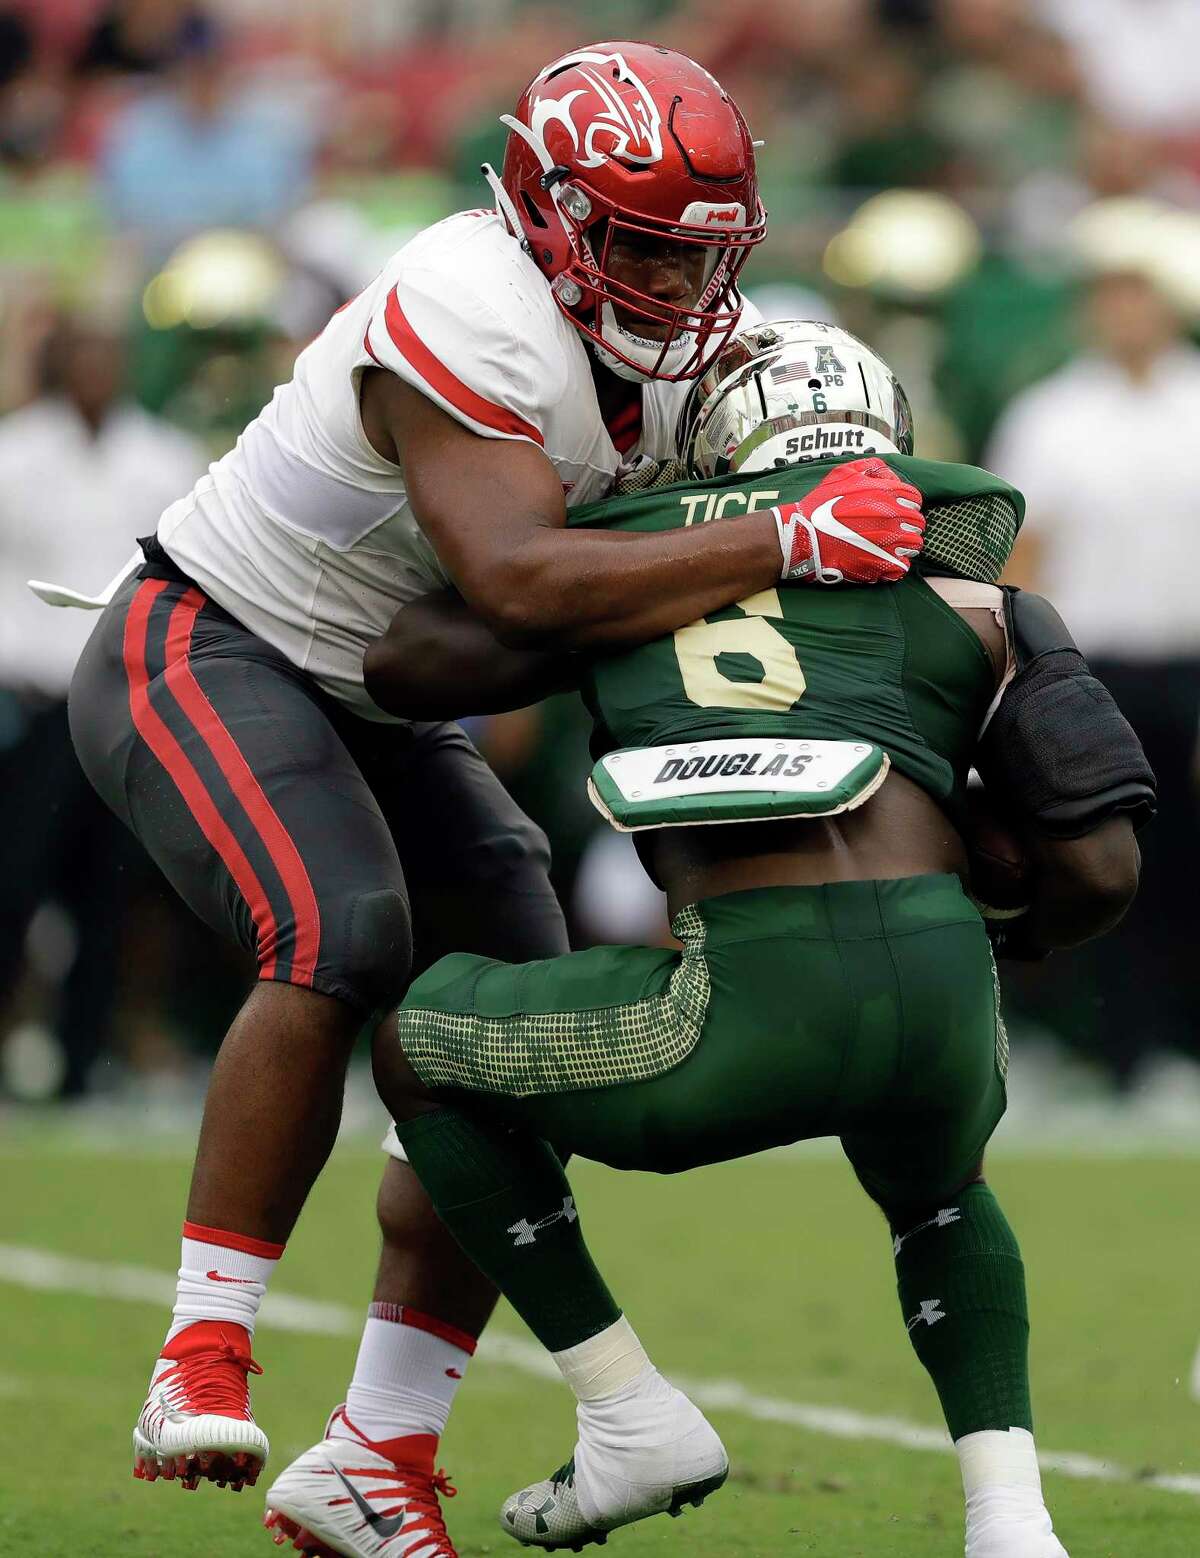 Houston defensive tackle Ed Oliver takes down South Florida running back Darius Tice (6) for a loss during the first half of an NCAA college football game, Saturday, Oct. 28, 2017, in Tampa, Fla. (AP Photo/Chris O'Meara)